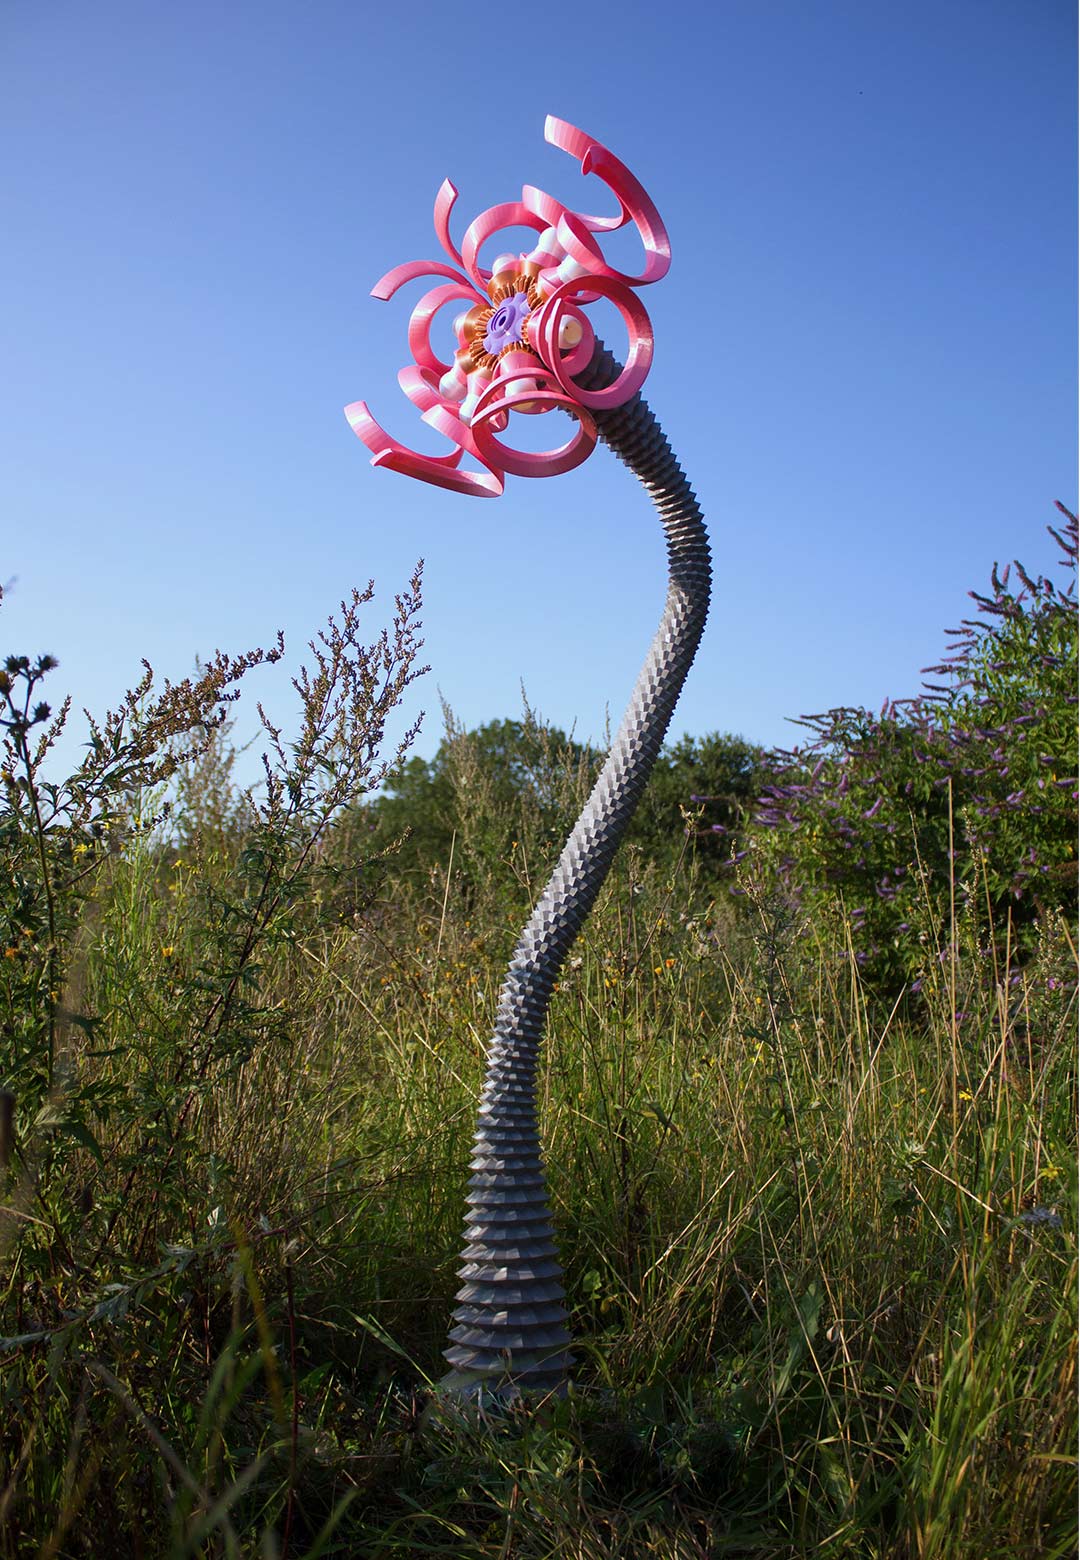 William Darell's kinetic sculptures abstract nature’s essence through mechanical forms